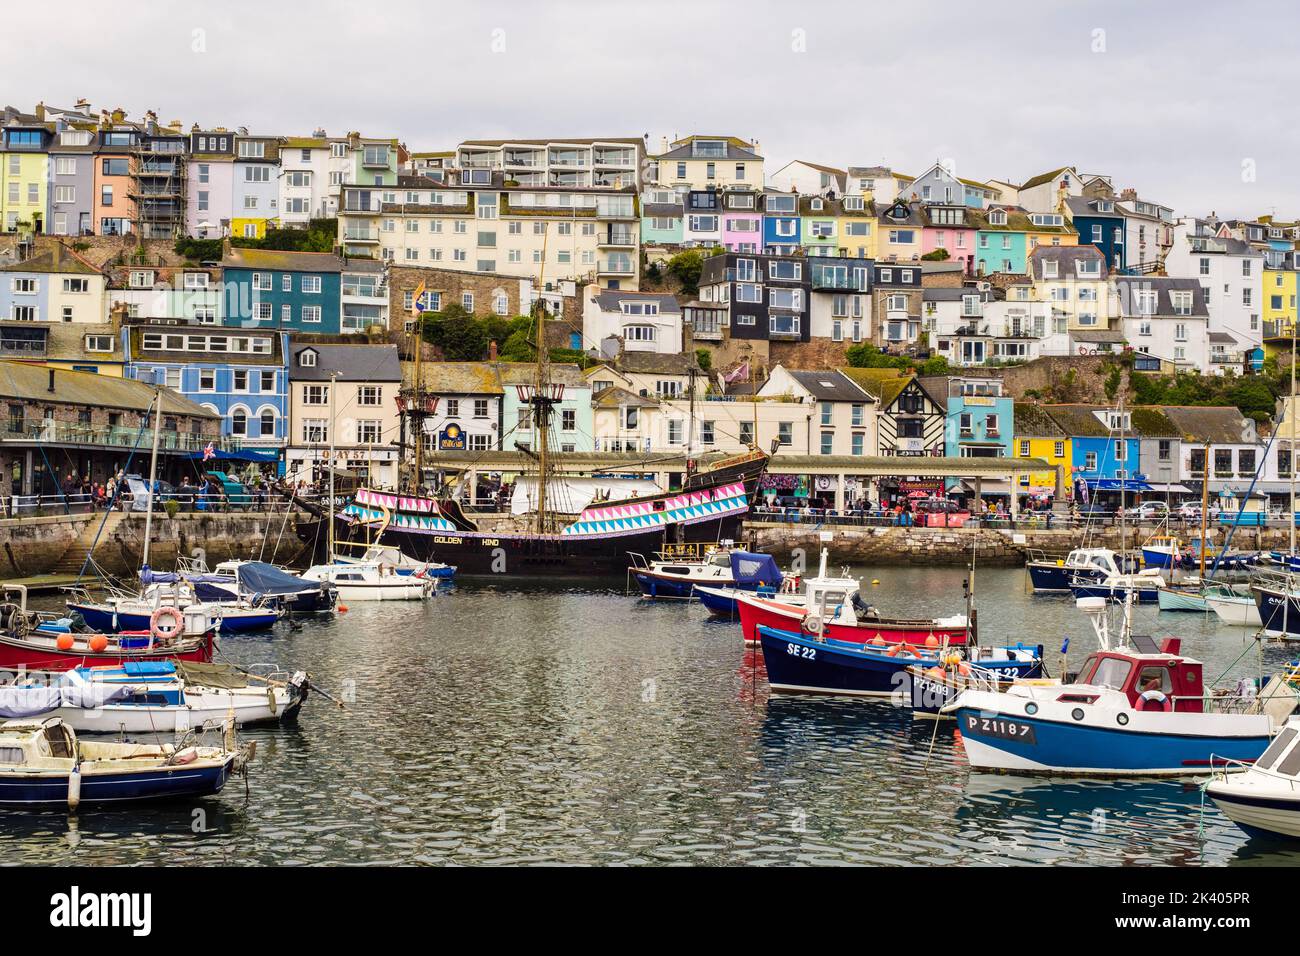 Colourful houses and shops overlooking the inner harbour with small boats moored. Brixham, Devon, England, UK, Britain Stock Photo